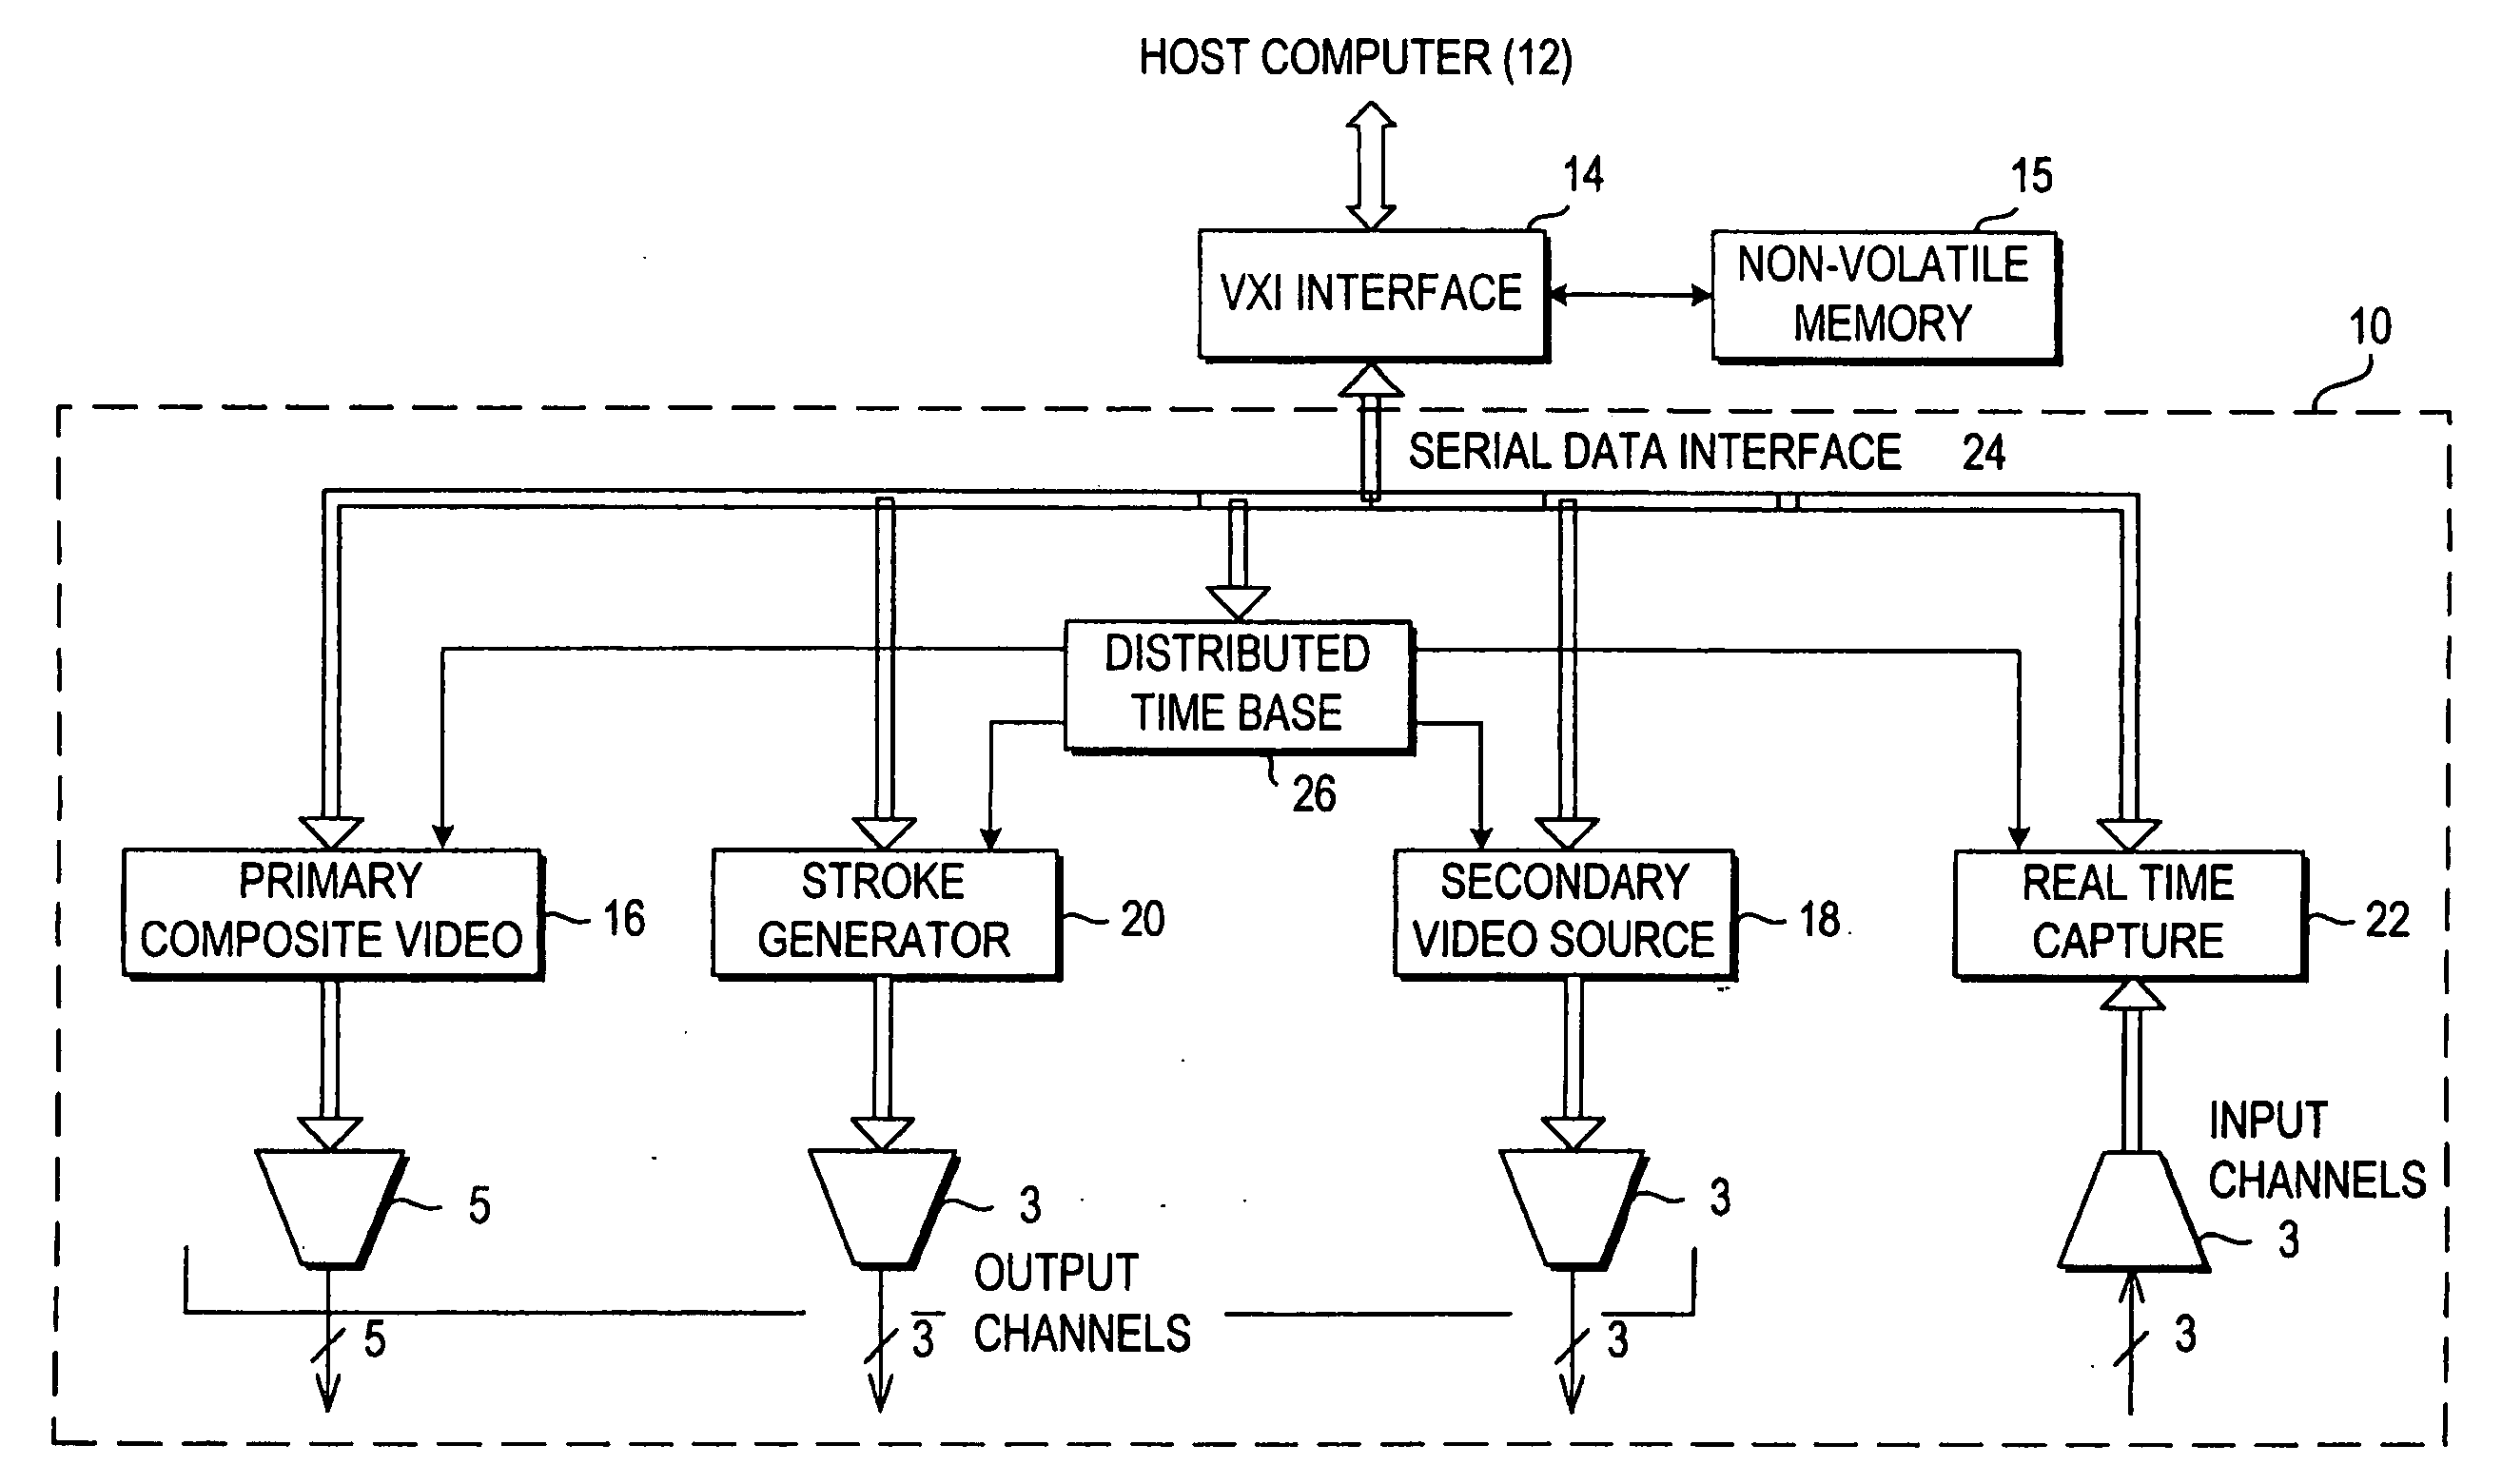 Video generator with NTSC/PAL conversion capability